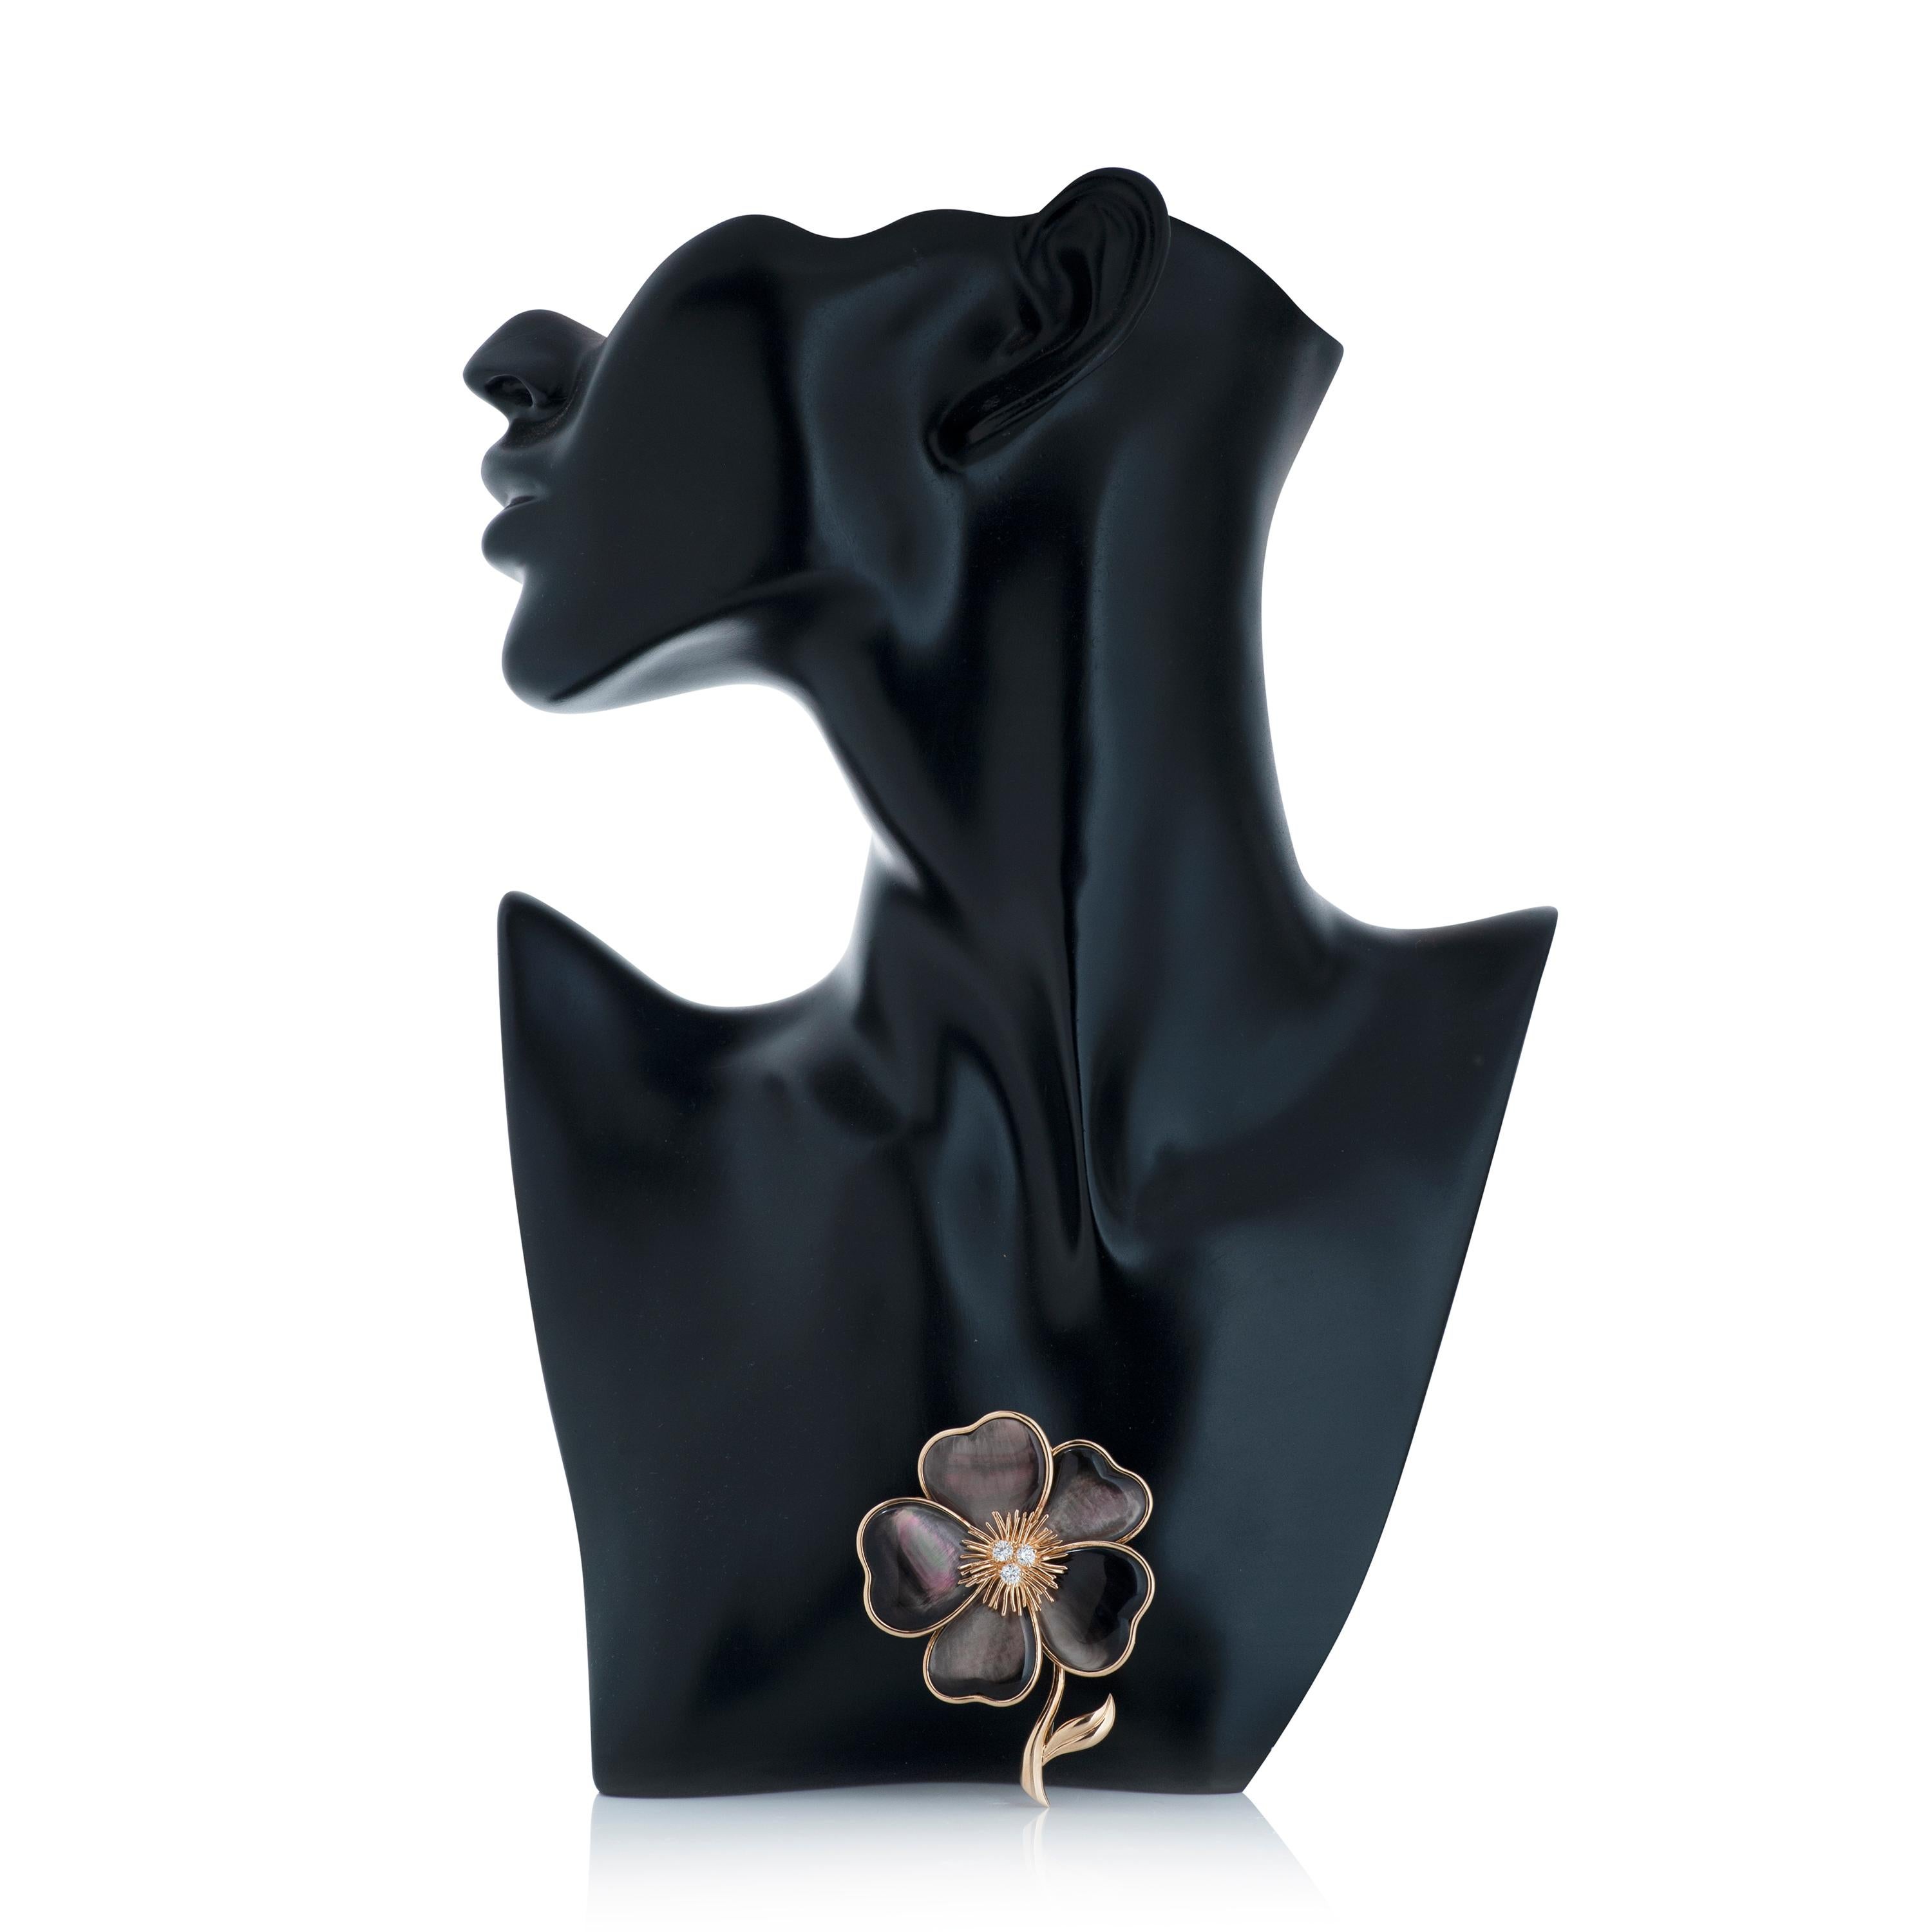 Van Cleef & Arpels diamond and mother of pearl Clematis flower brooch in 18k yellow gold.

This VCA brooch features 5 gray mother of pearl petals with 3 round brilliant cut diamonds set in the center.  The total diamond weight of the brooch is